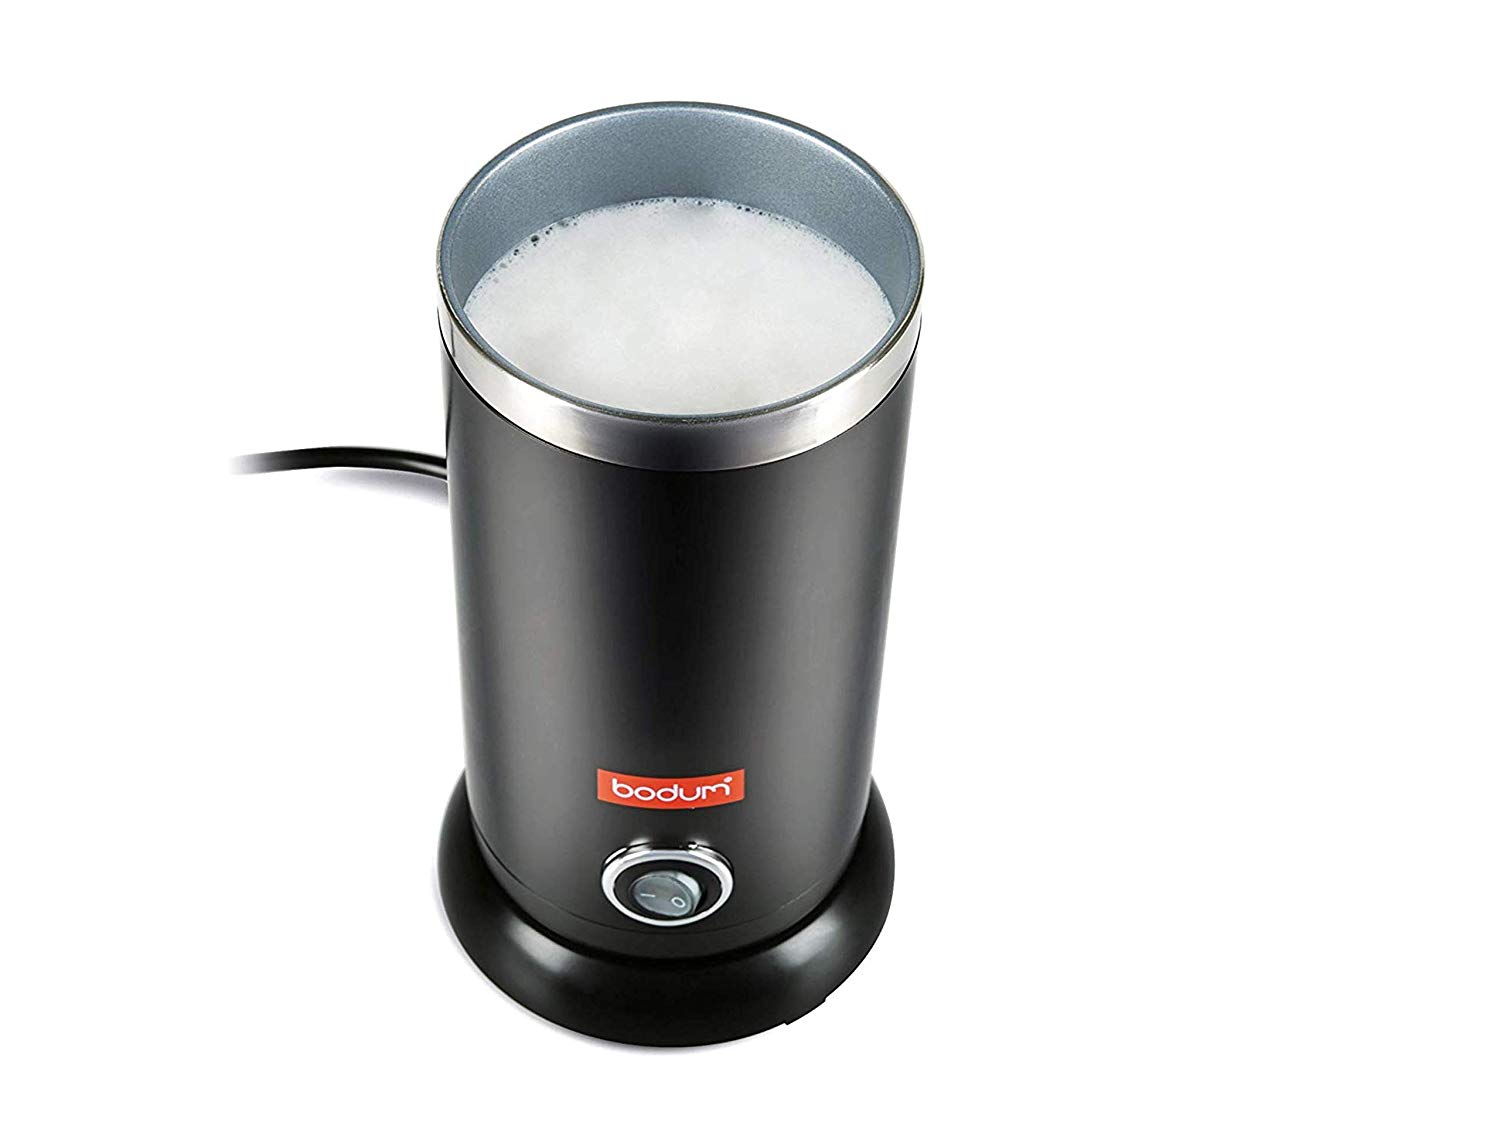 BonJour Milk Frother Review: Features of All Models at MilkFrotherTop